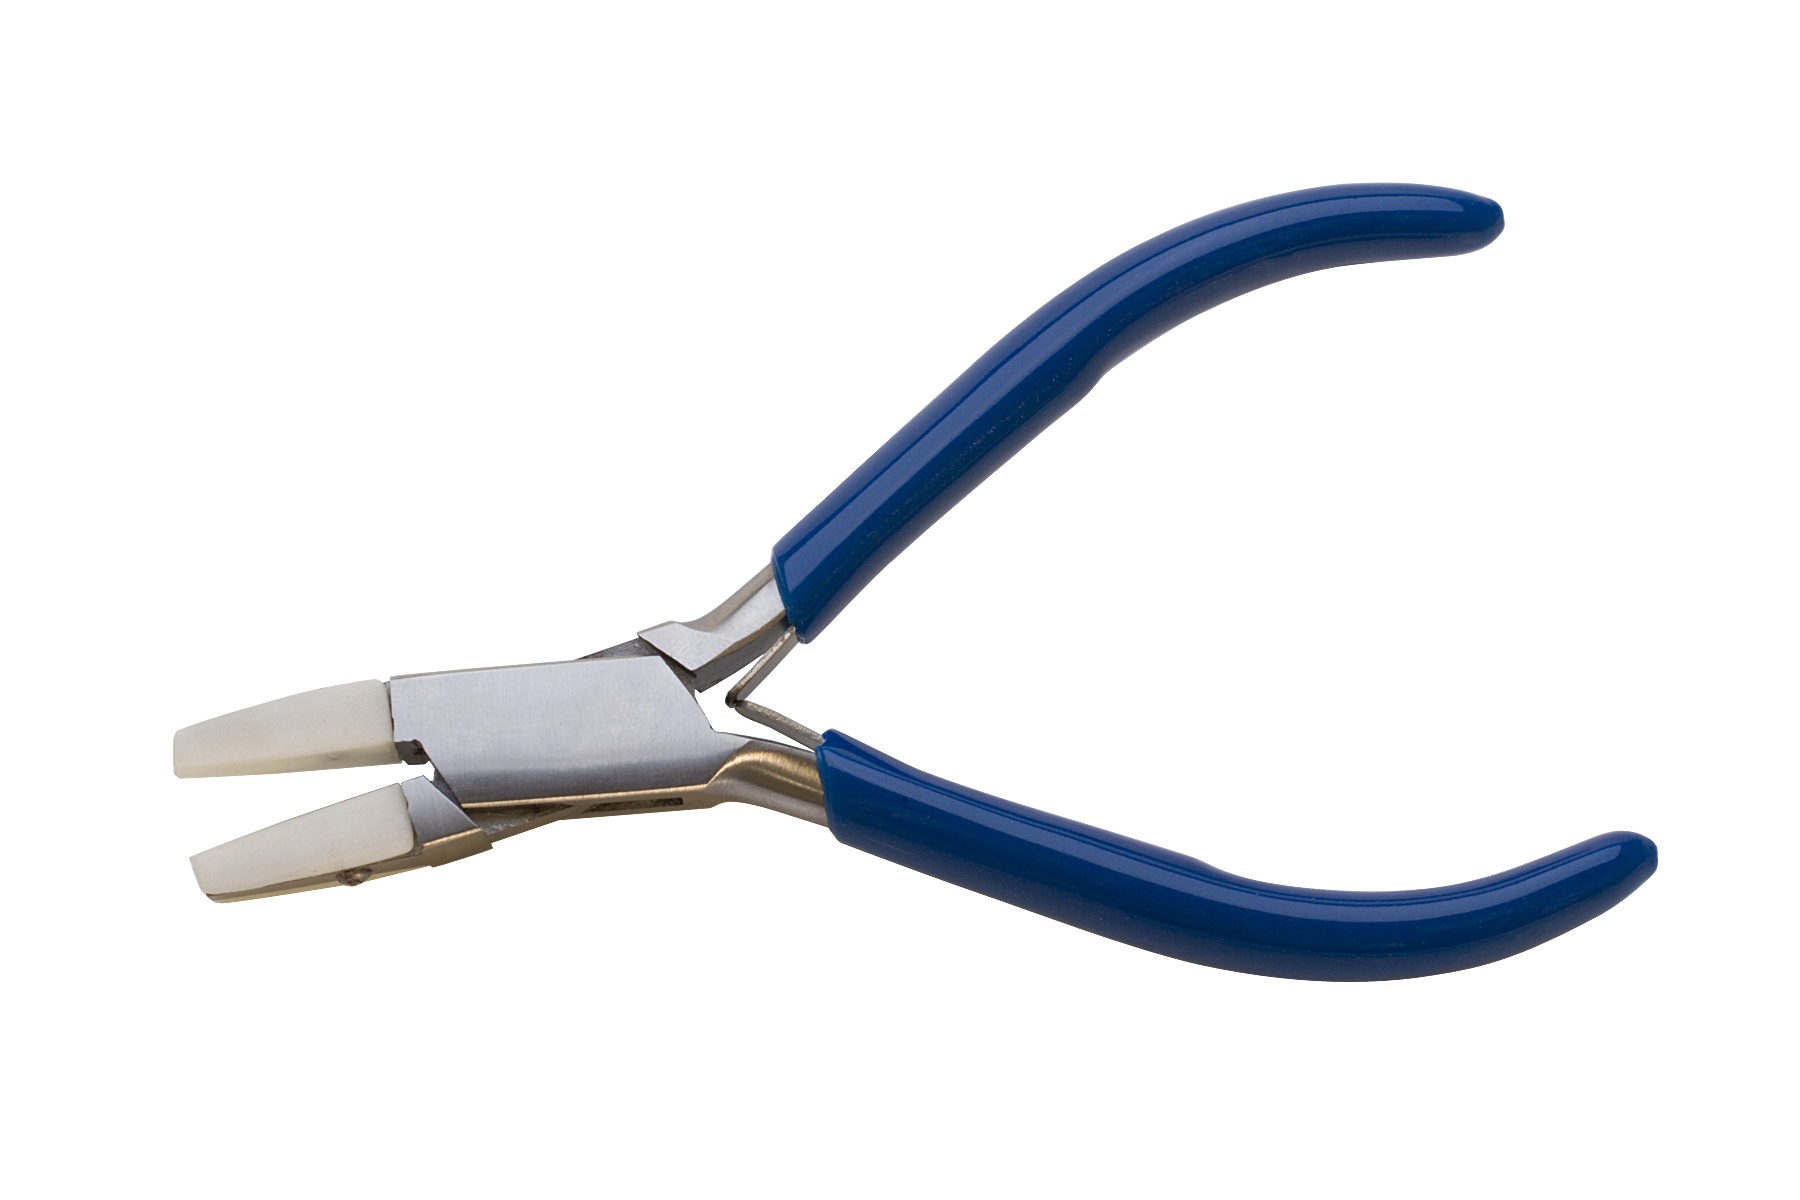 Non-Marring Brass Jaw Flat-Nosed Plier